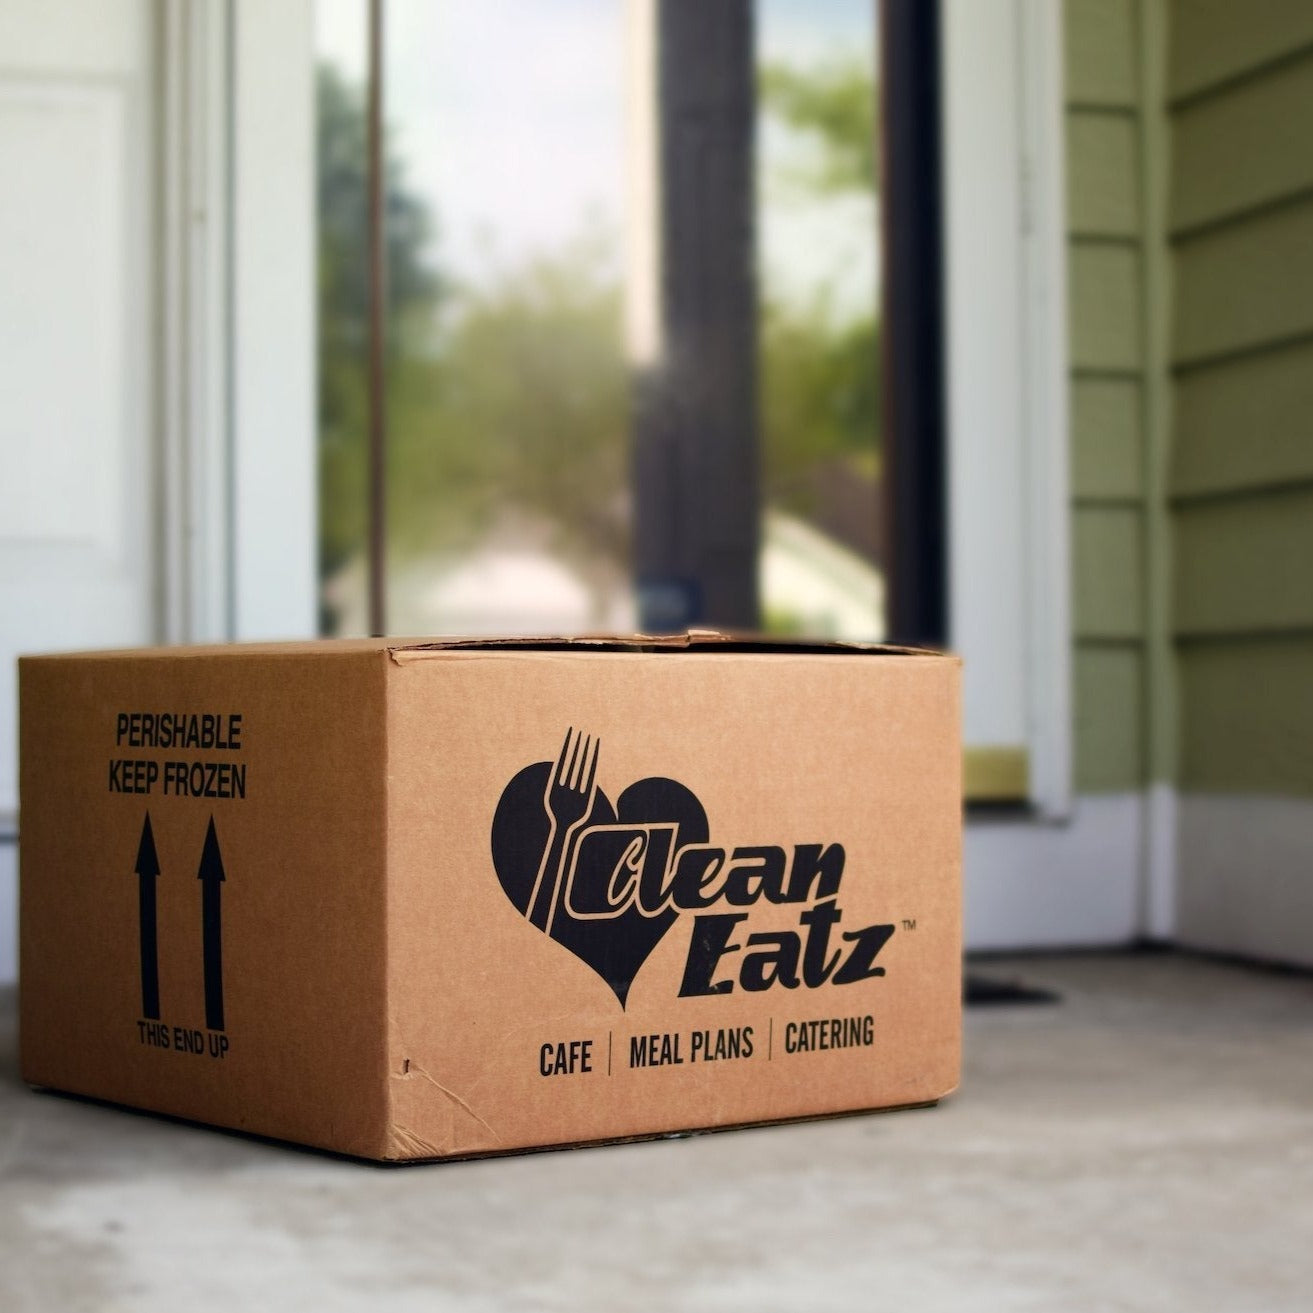 Keto Meal Delivery Box on Porch: Low Carb Keto Meal plans delivered from Clean Eatz Kitchen